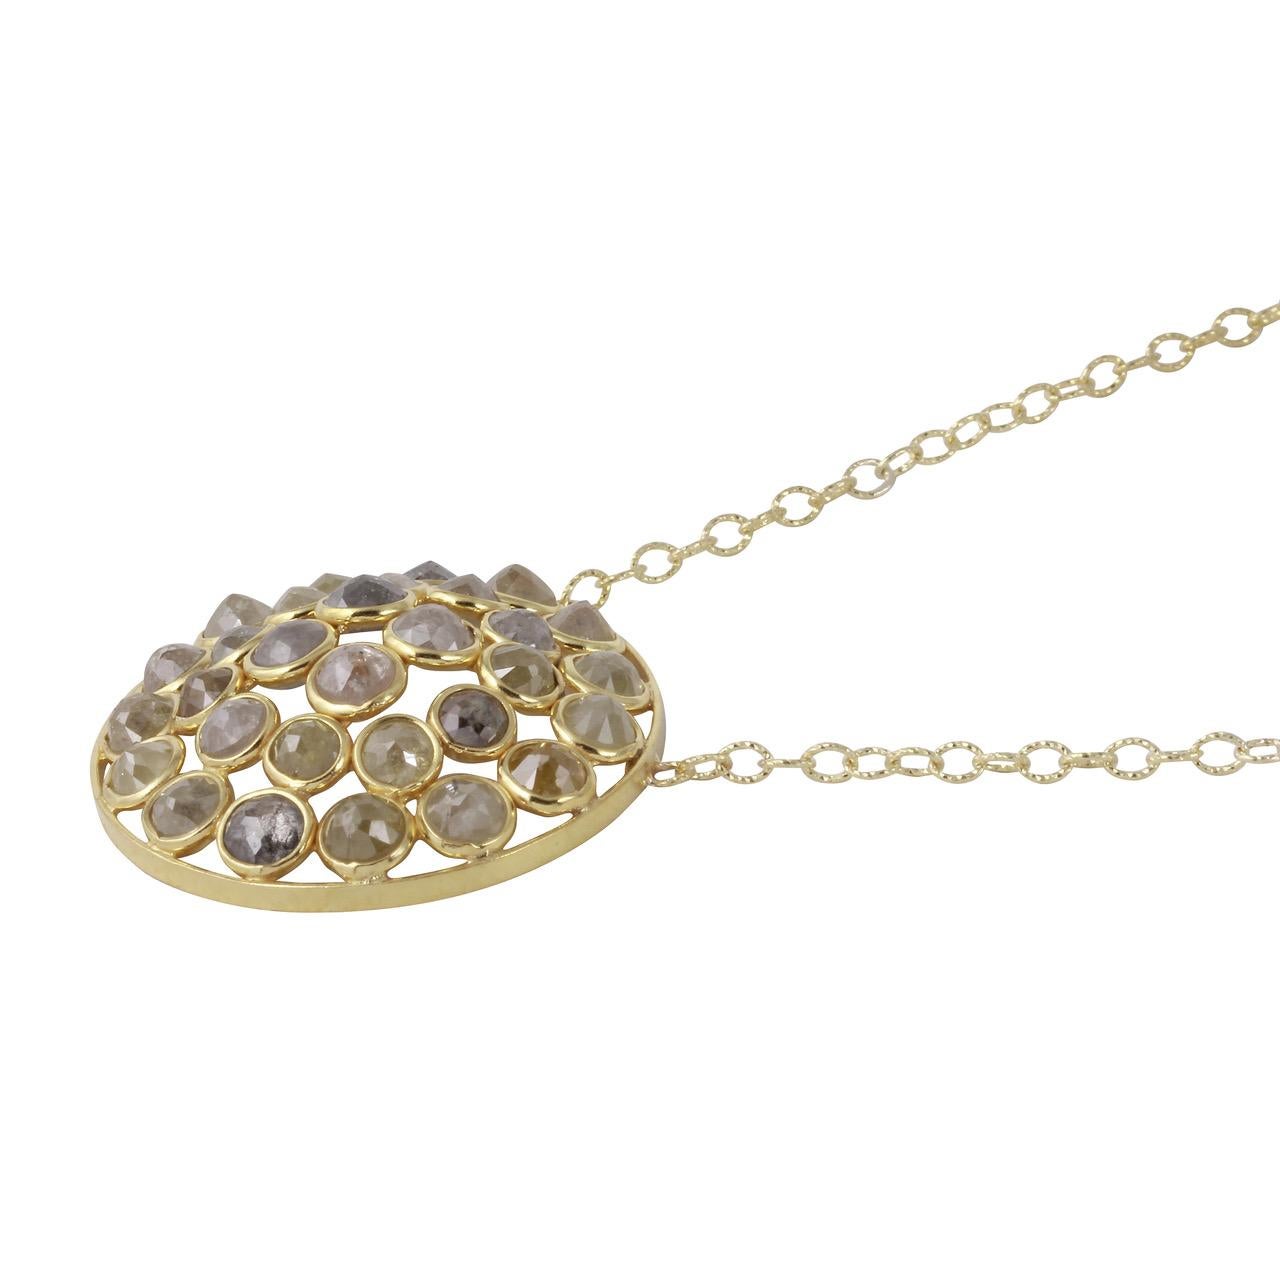 Natural Color Dome Rose Cut Diamond Necklace set in 18k Yellow gold designed by Amyn The Jeweler.

30 Color Diamonds  7.30cts. 

Passionately Created and Made in Los Angeles.

Model: NDOMELRG


